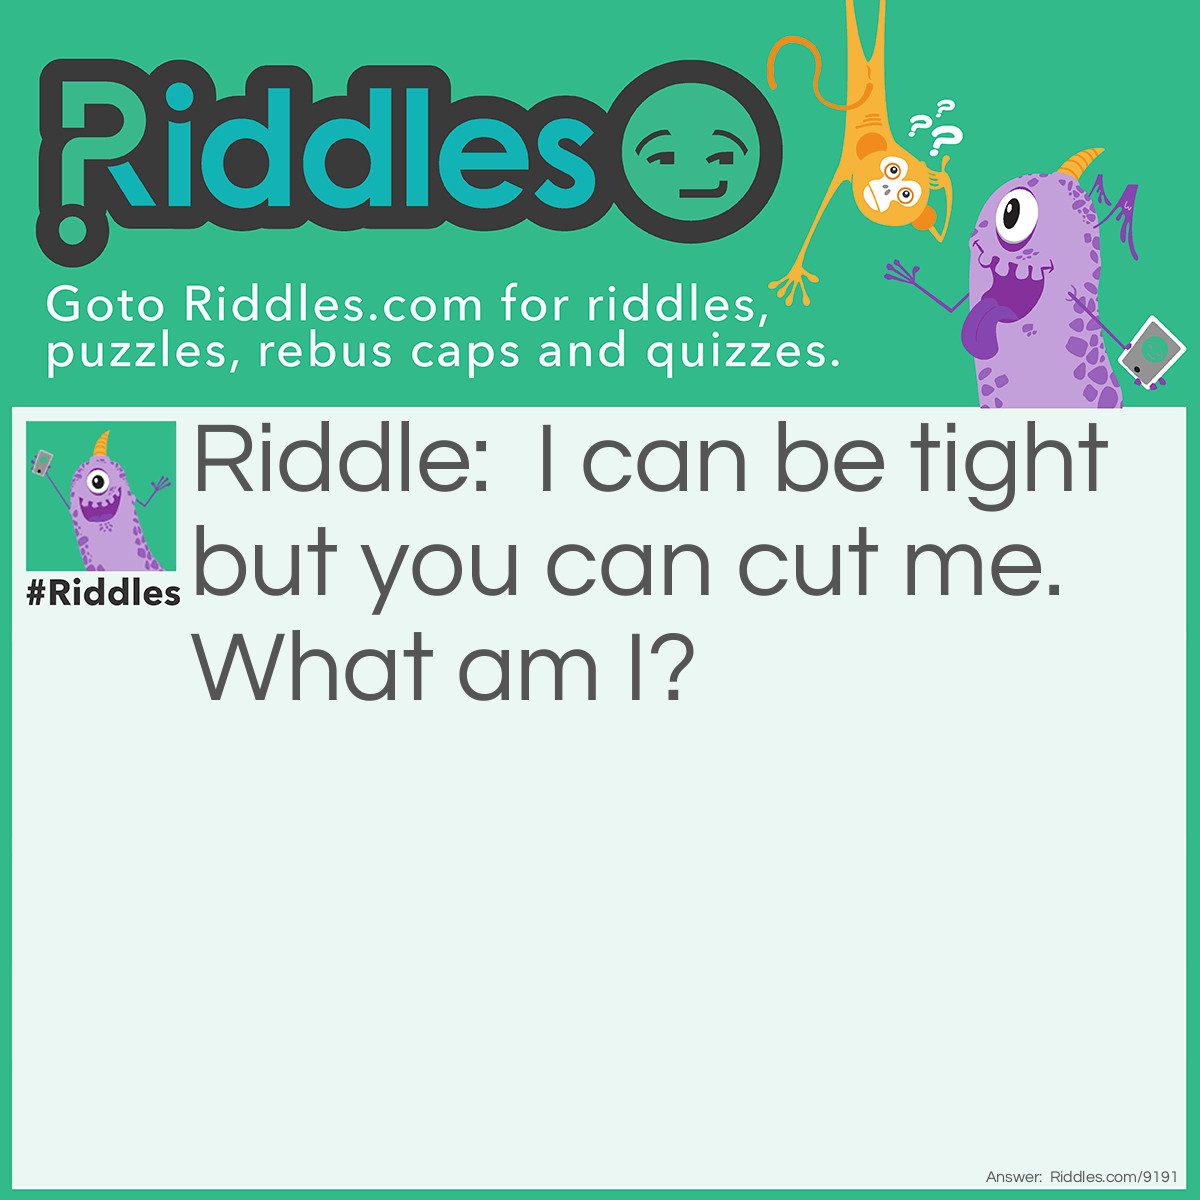 Riddle: I can be tight but you can cut me. What am I? Answer: A corner.